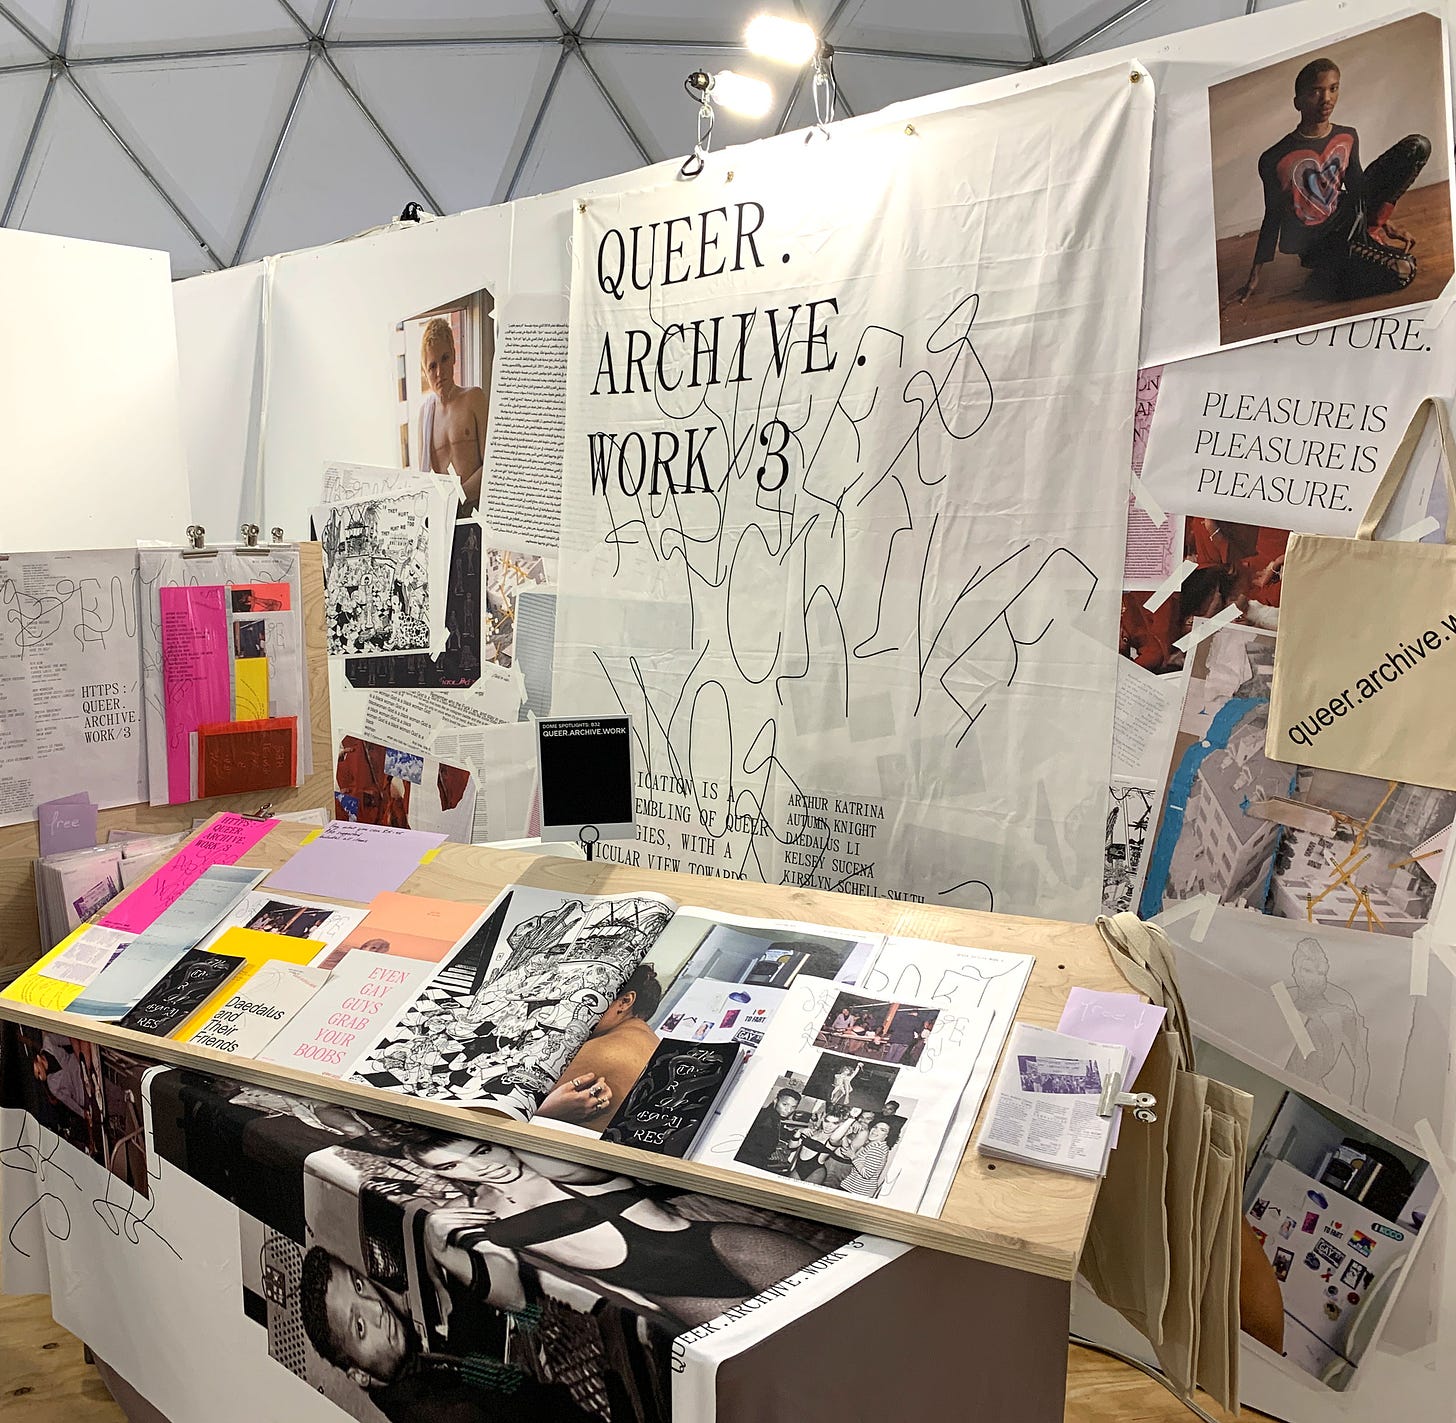 A view of the Queer.Archive.Work booth at the New York Art Book Fair in 2019. In the foreground is a slanted wood display with many pamphlets and zines layered over one another. In the background is a wall with many more publications, images, and totes in a jumble. A large cloth sign or poster says QUEER.ARCHIVE.WORK in both typed and hand-drawn letters. The effect is exuberantly varied and productive.